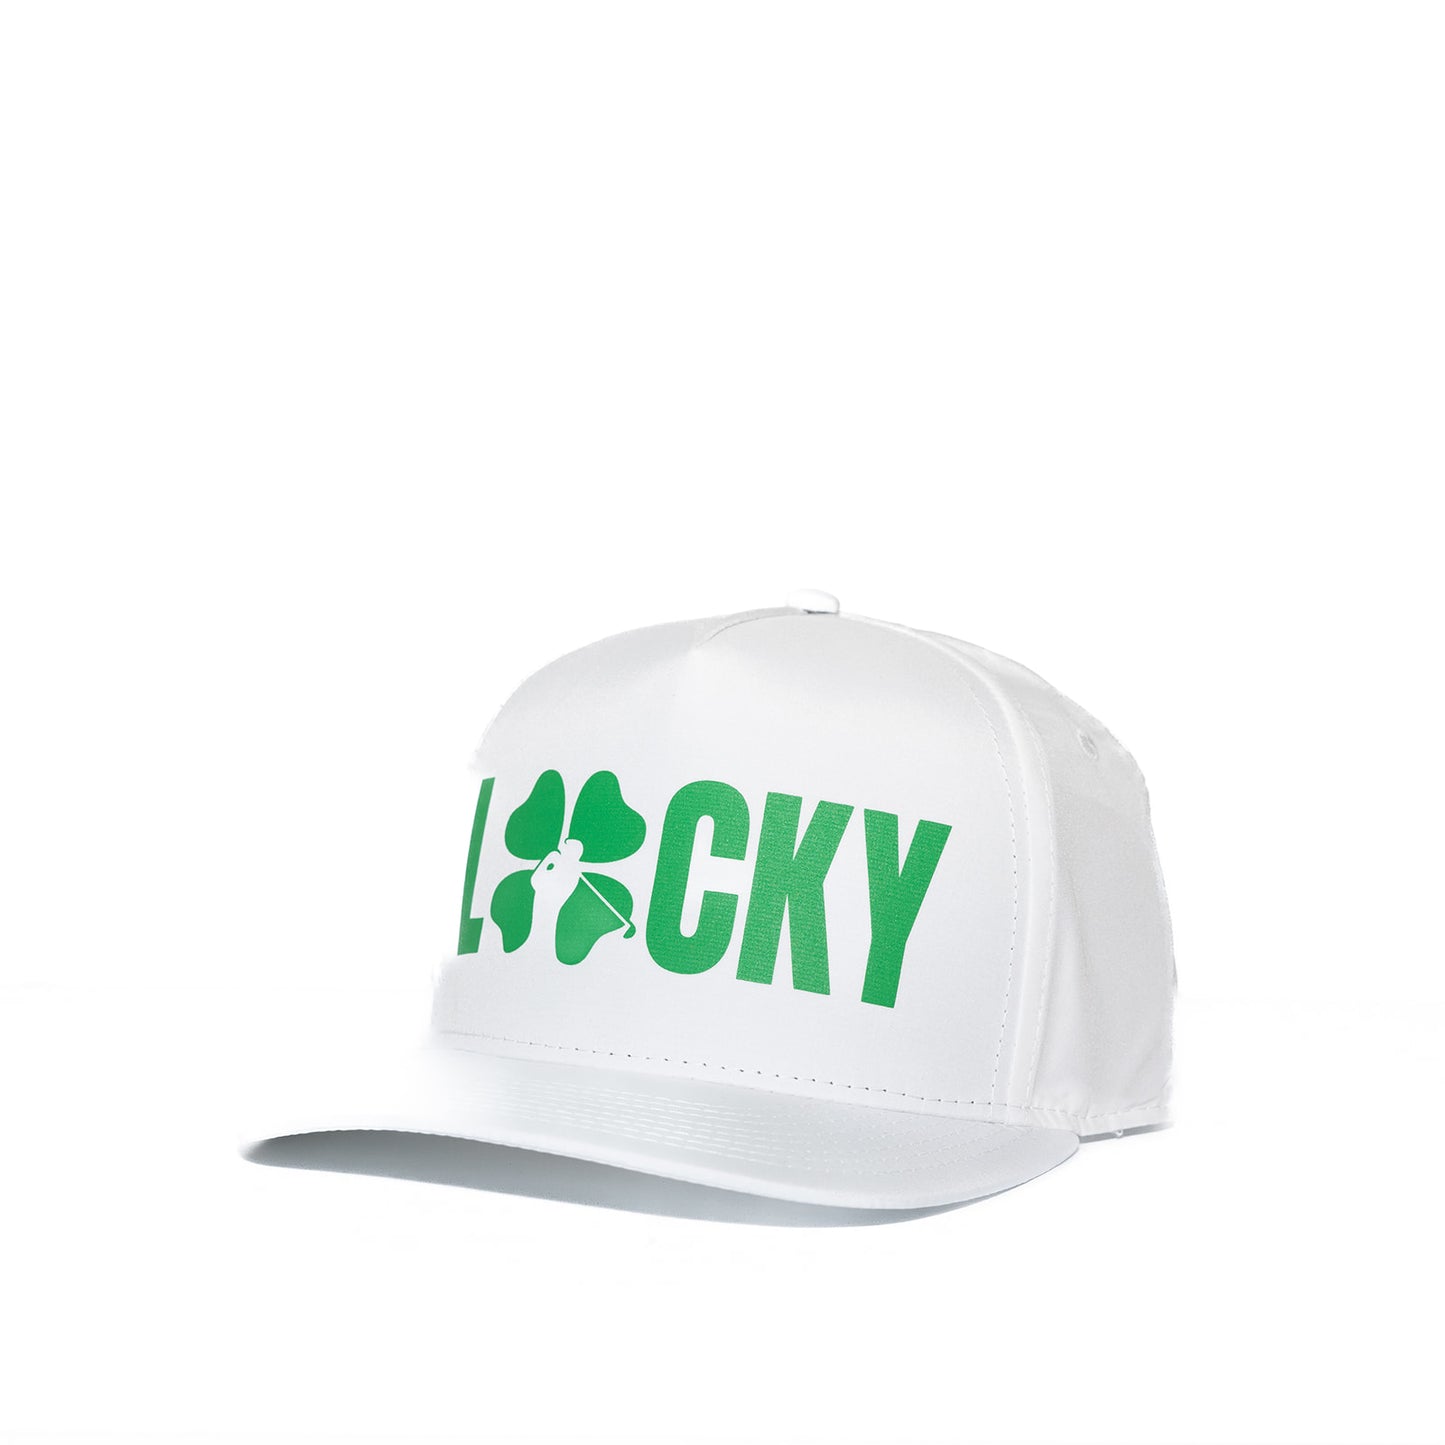 White "LUCKY" Hat